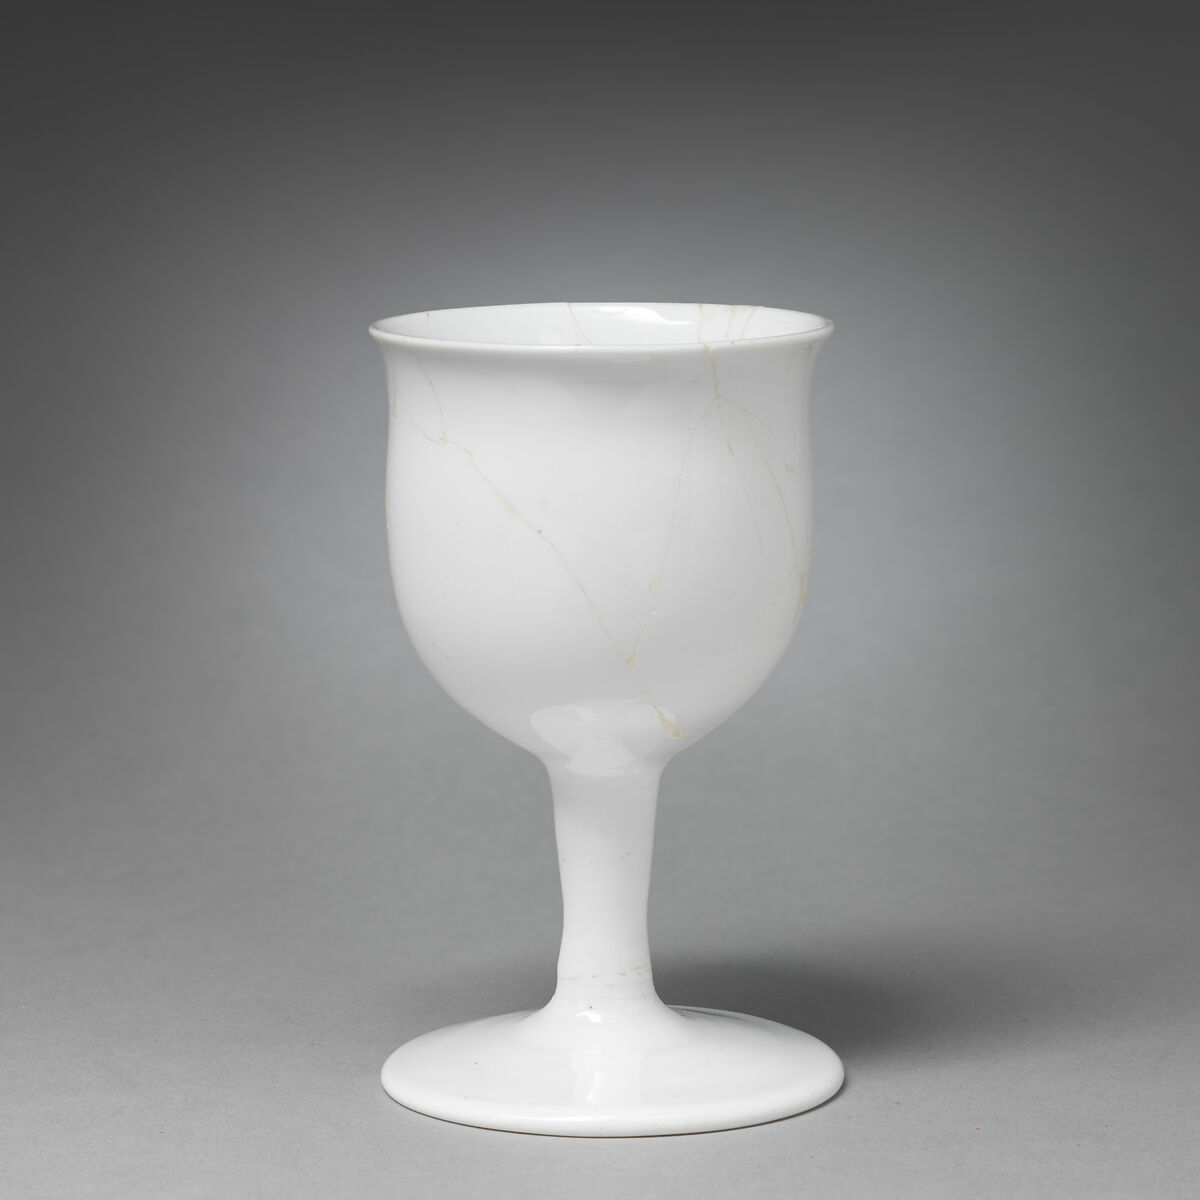 Egg cup (one of a pair), Milk glass, British, Bristol 